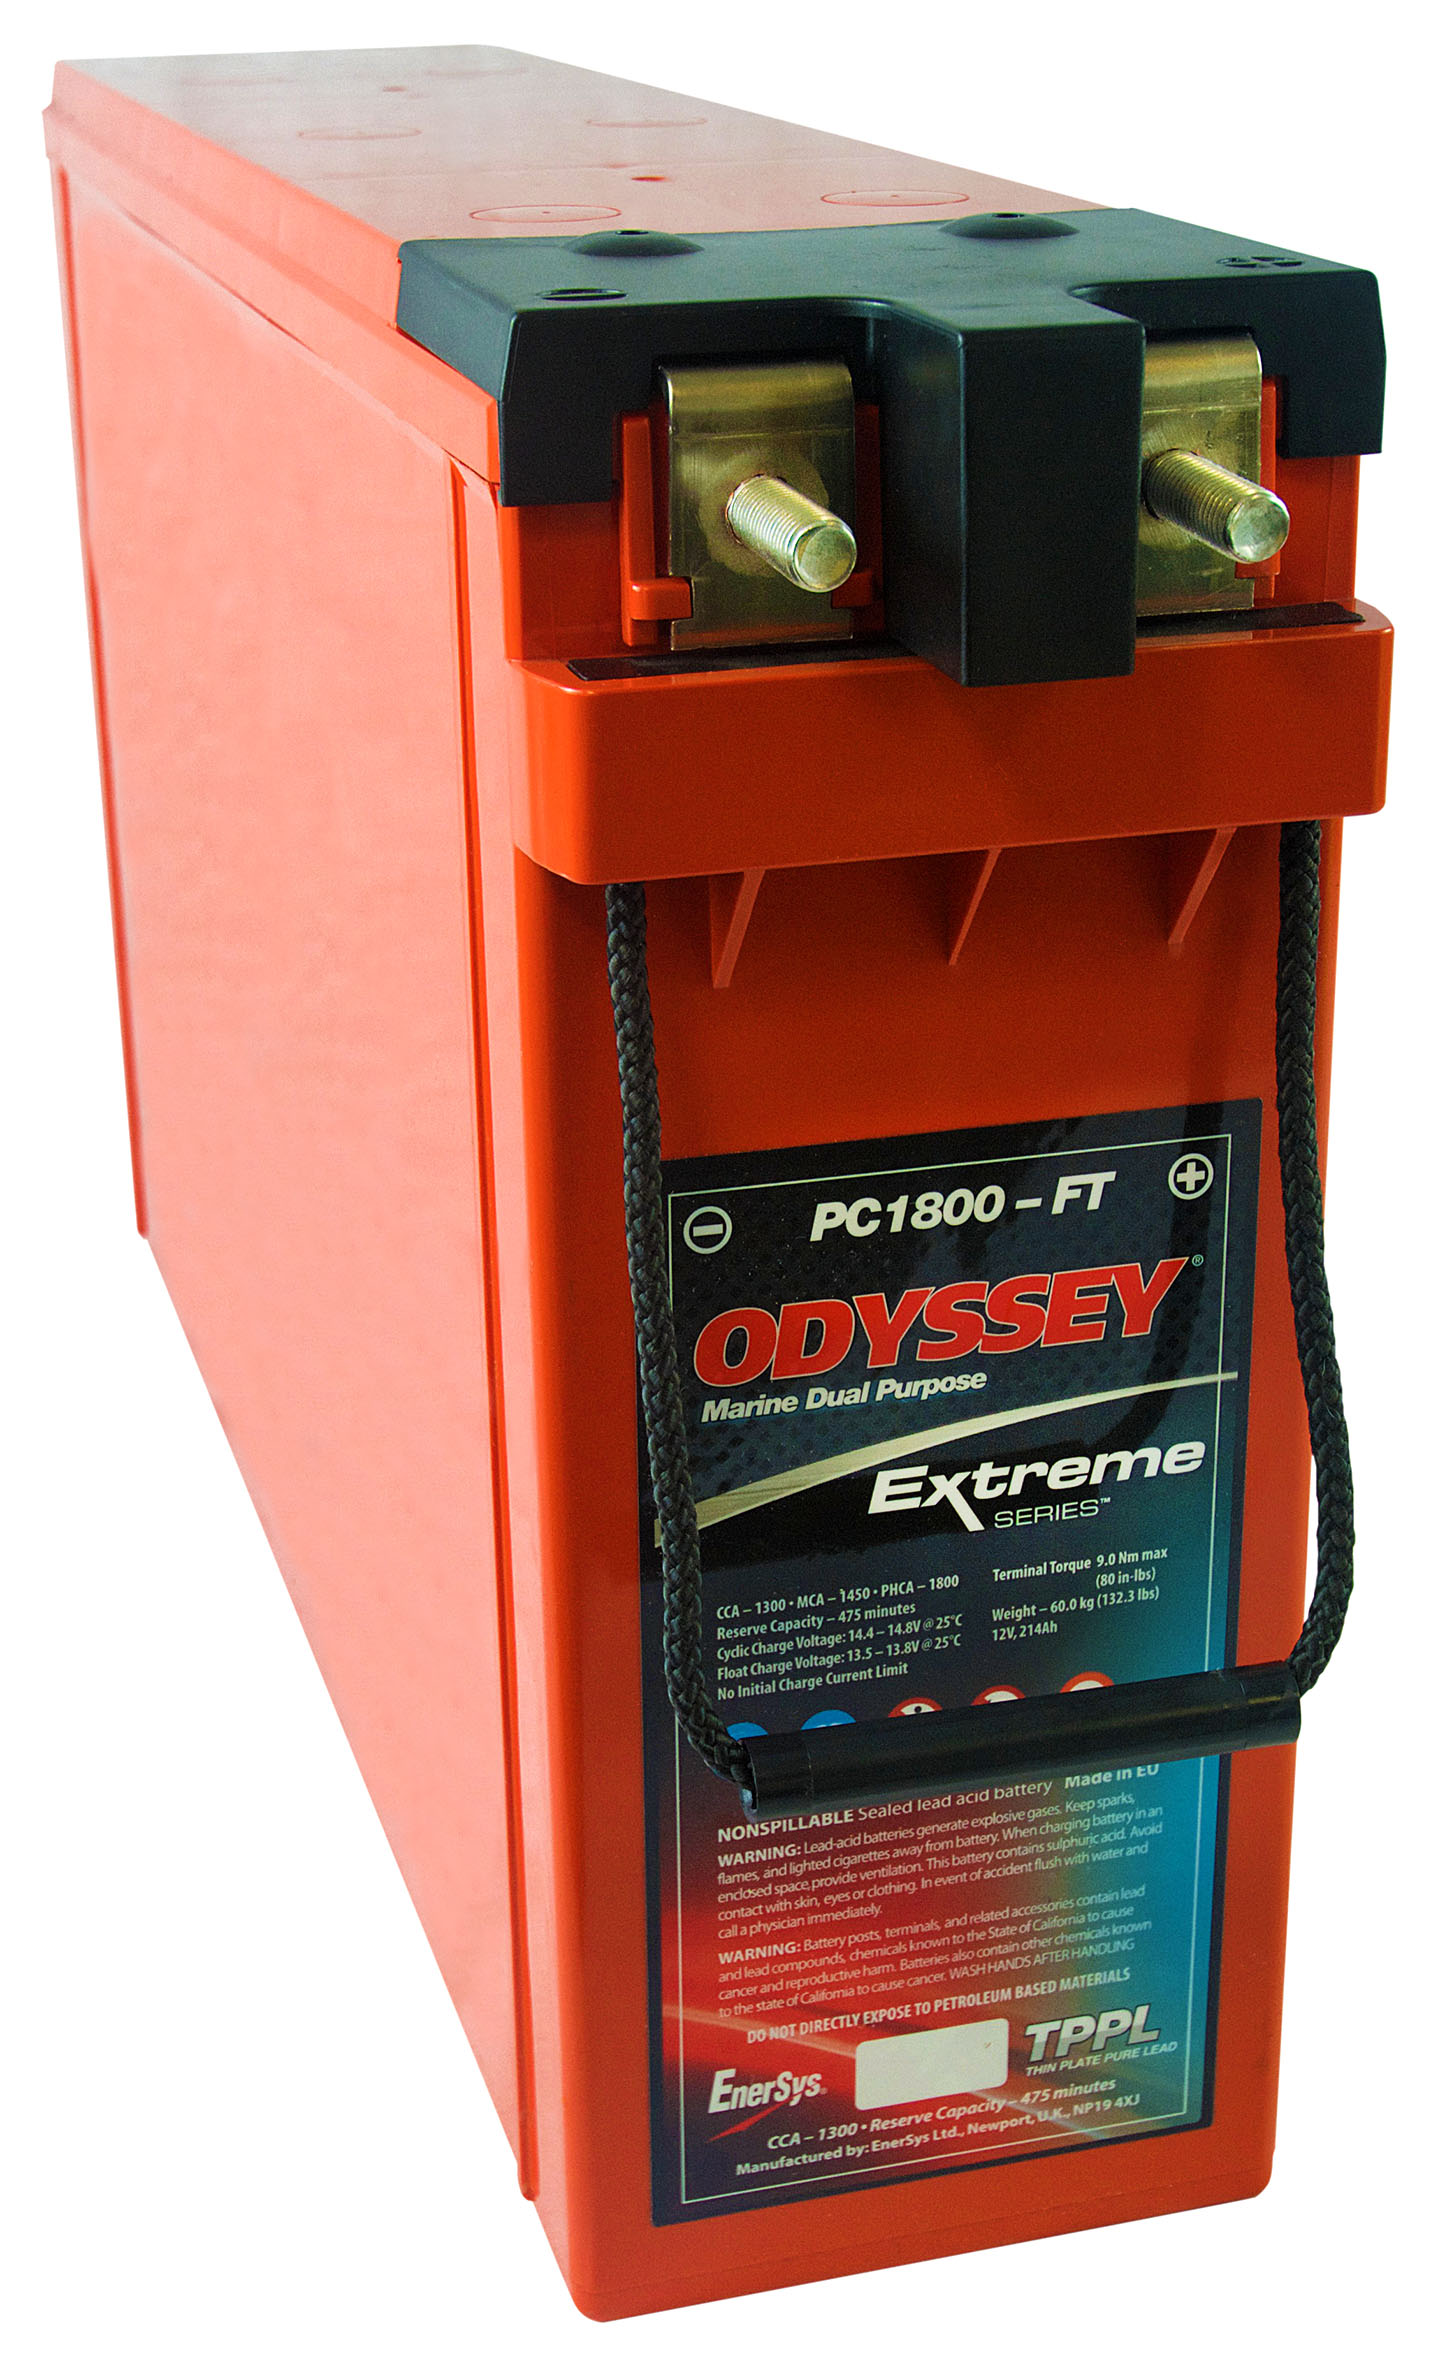 Odyssey Extreme PC1800-FT Product Picture.jpg